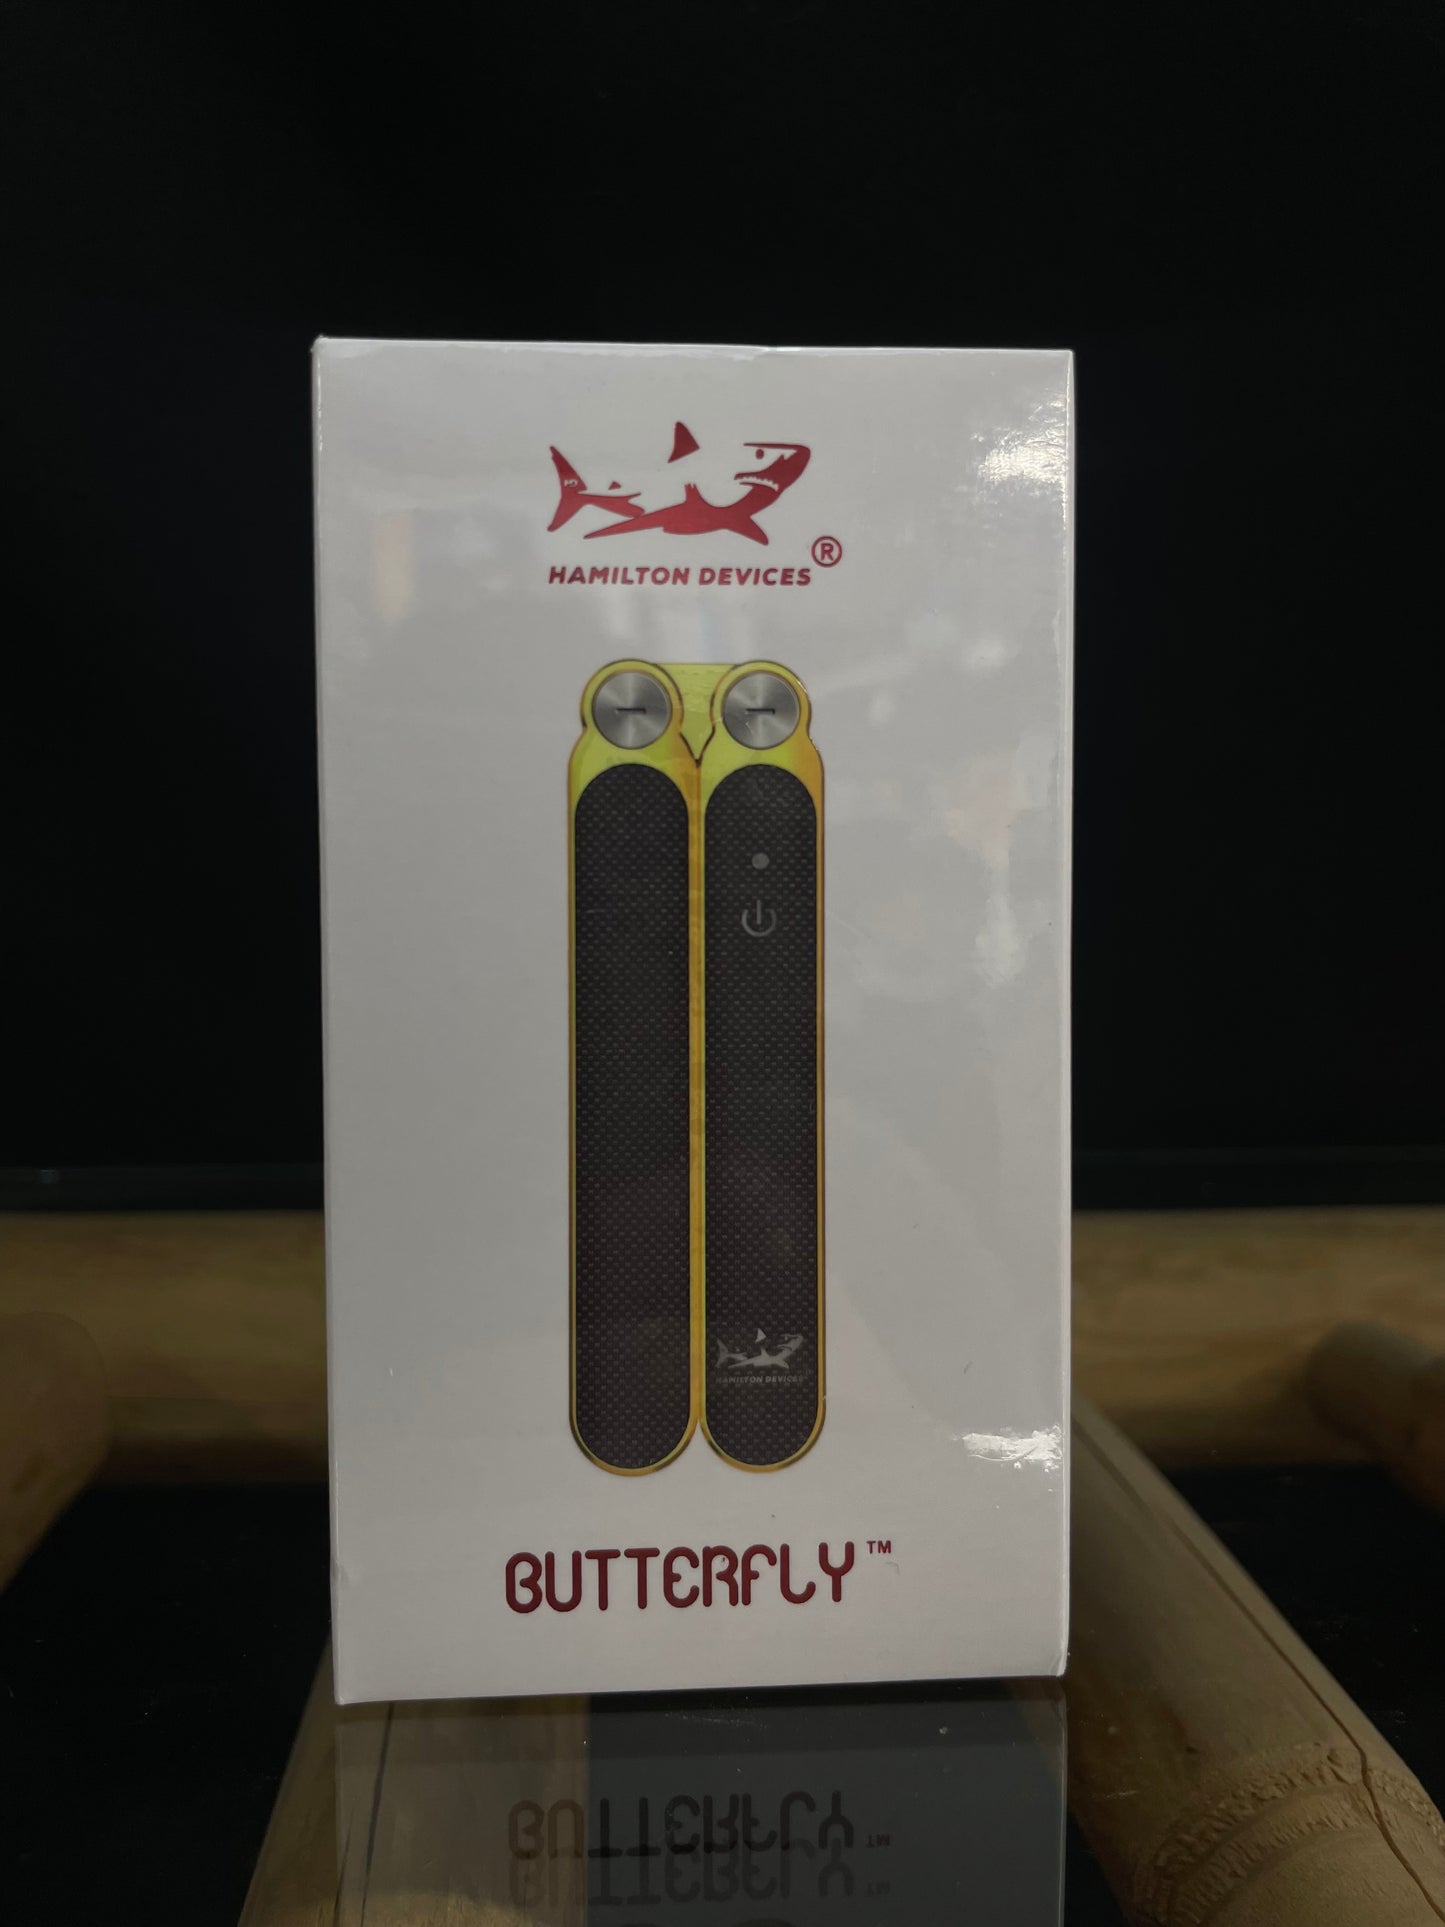 Hamilton Devices Butterfly Batteries